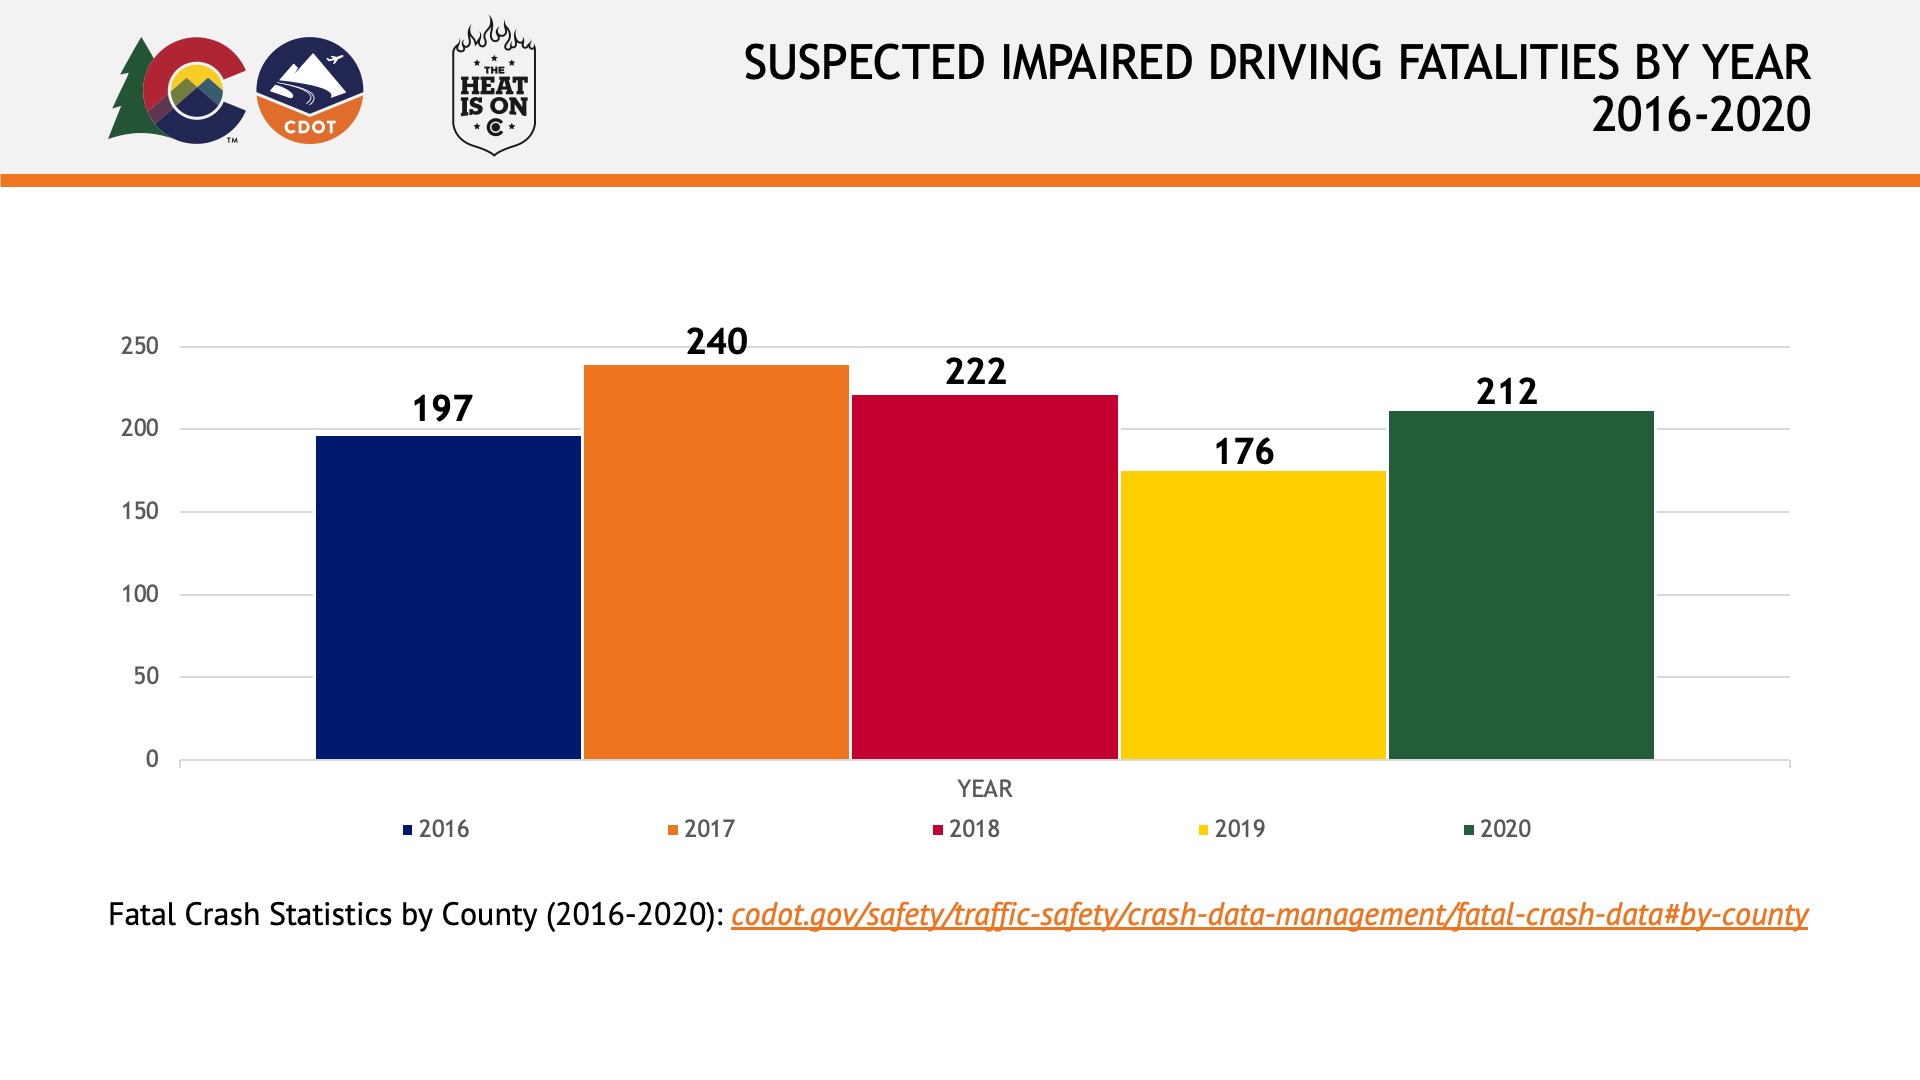 DUI Enforcement Chart - Suspected impaired driving fatalities by year from 2016 to 2020 detail image